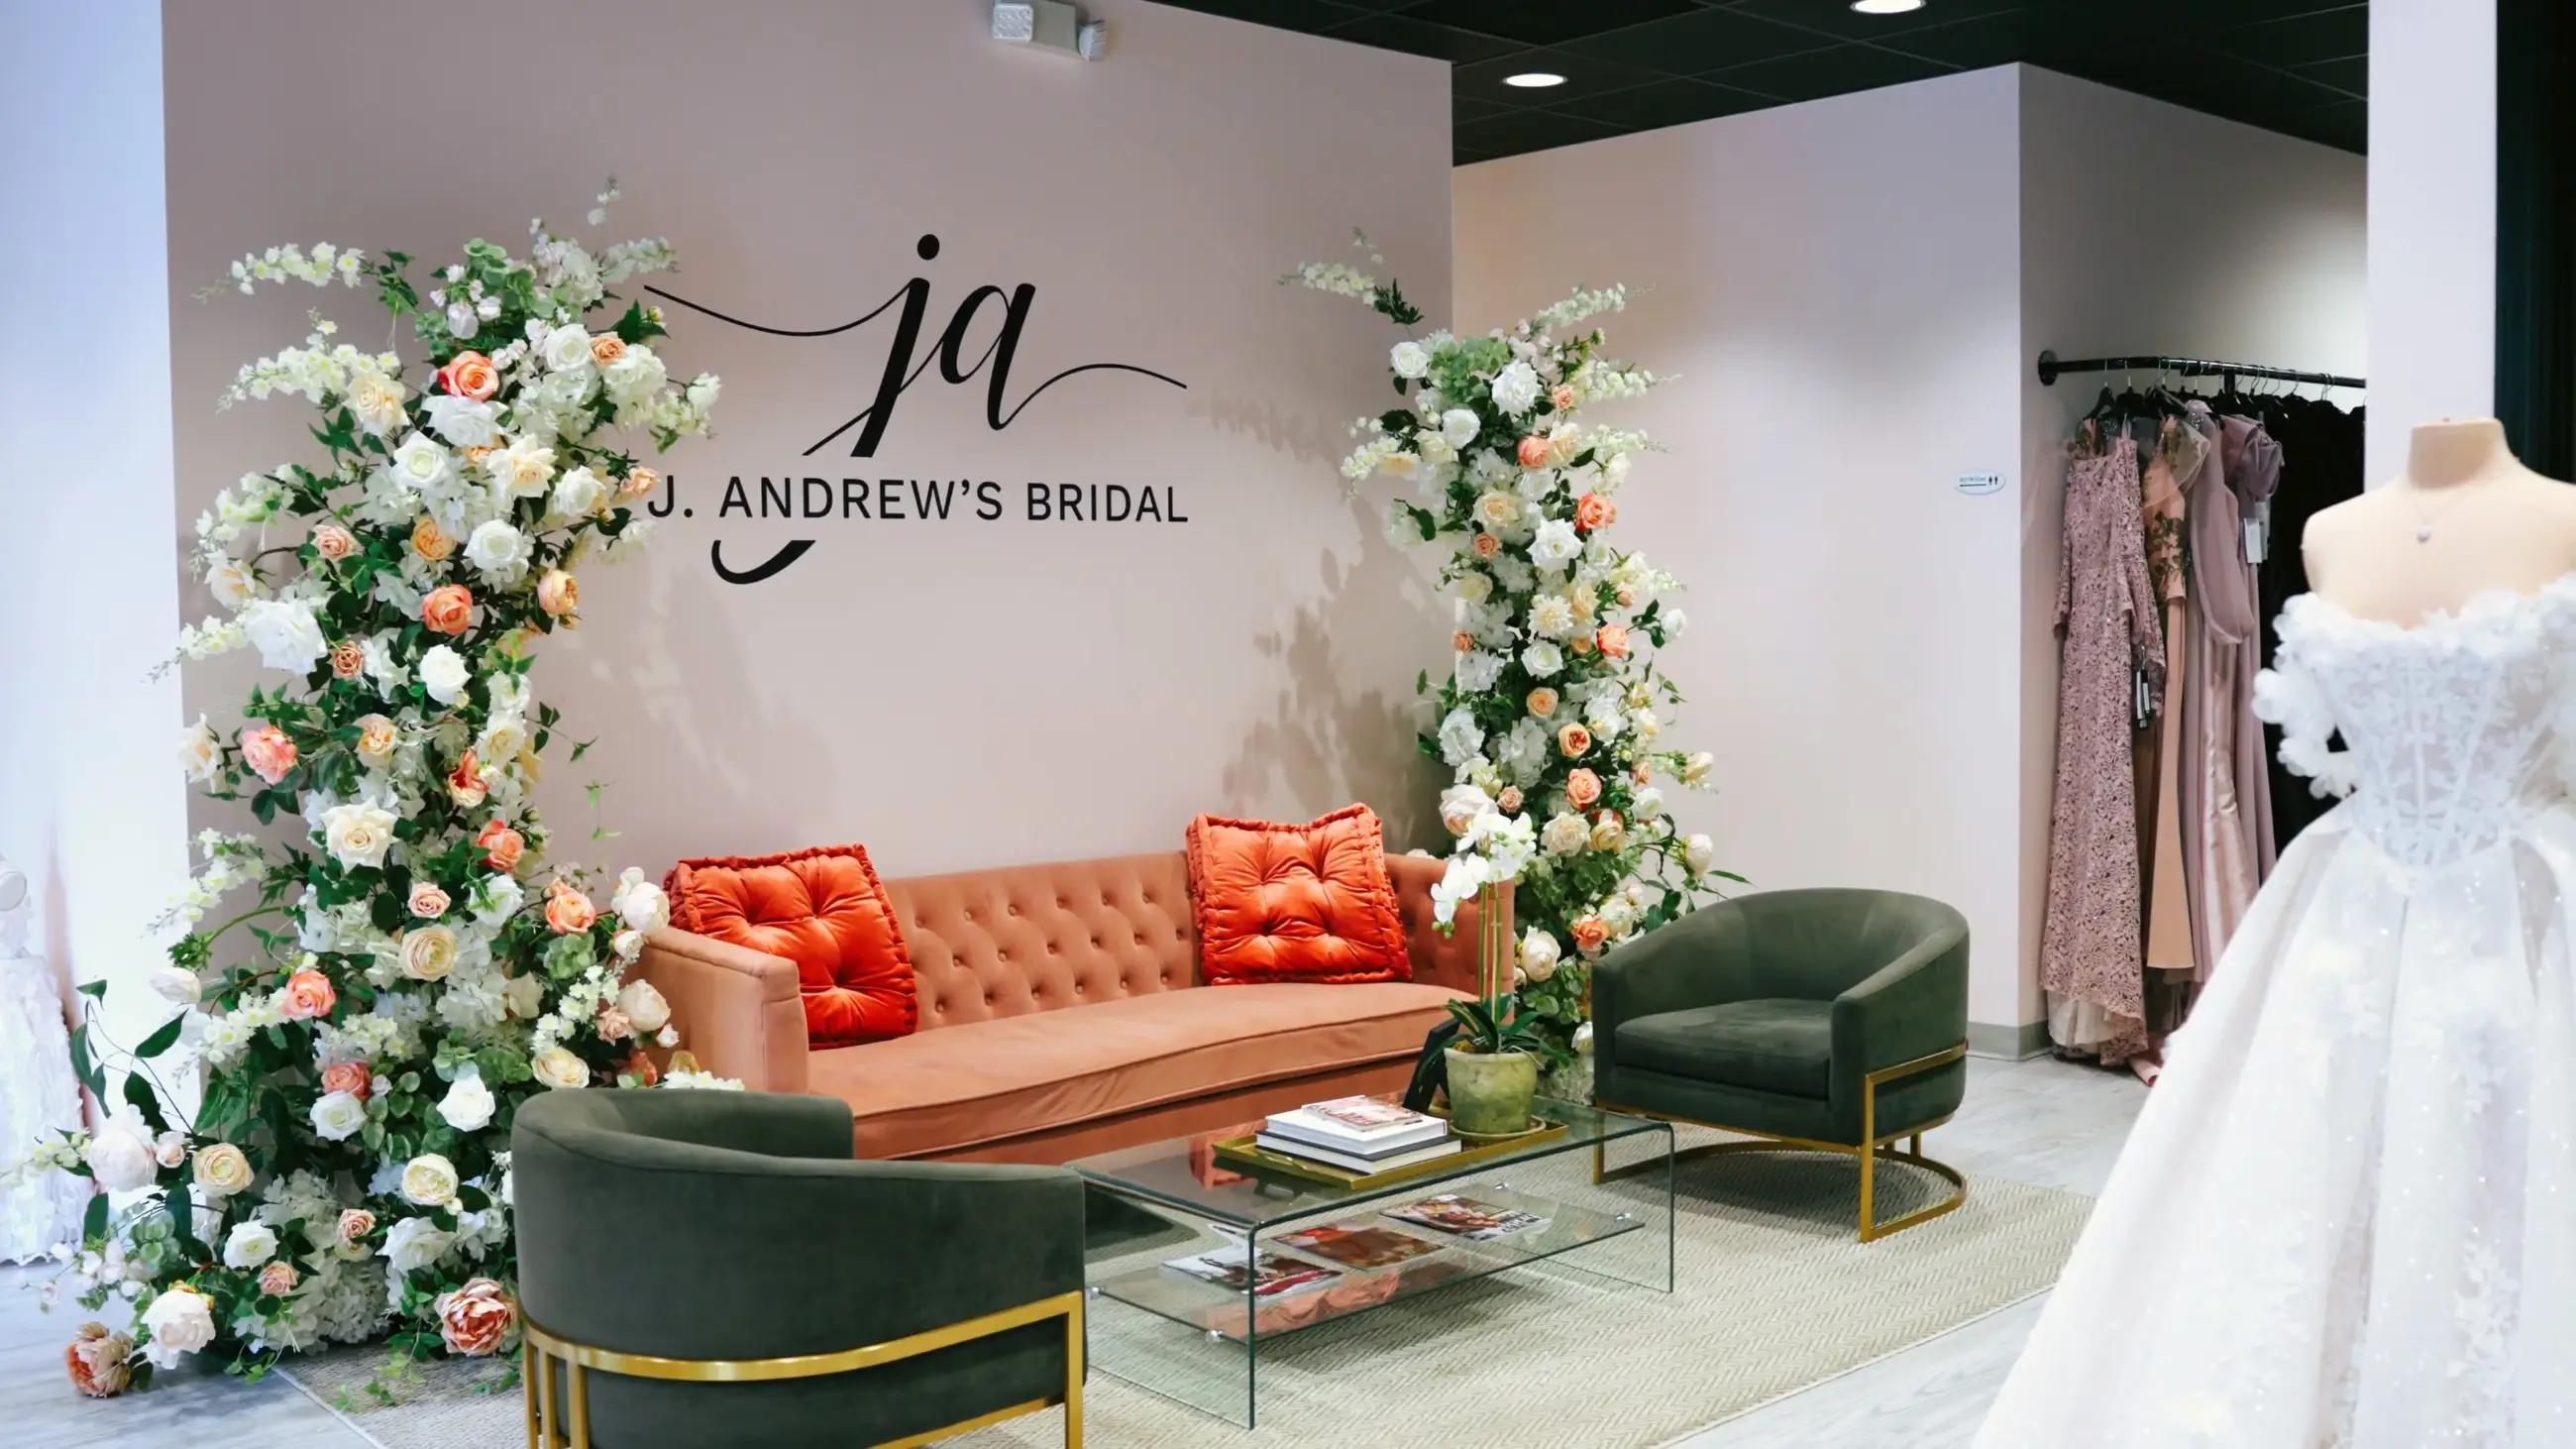  J Andrew's Bridal Experience Room